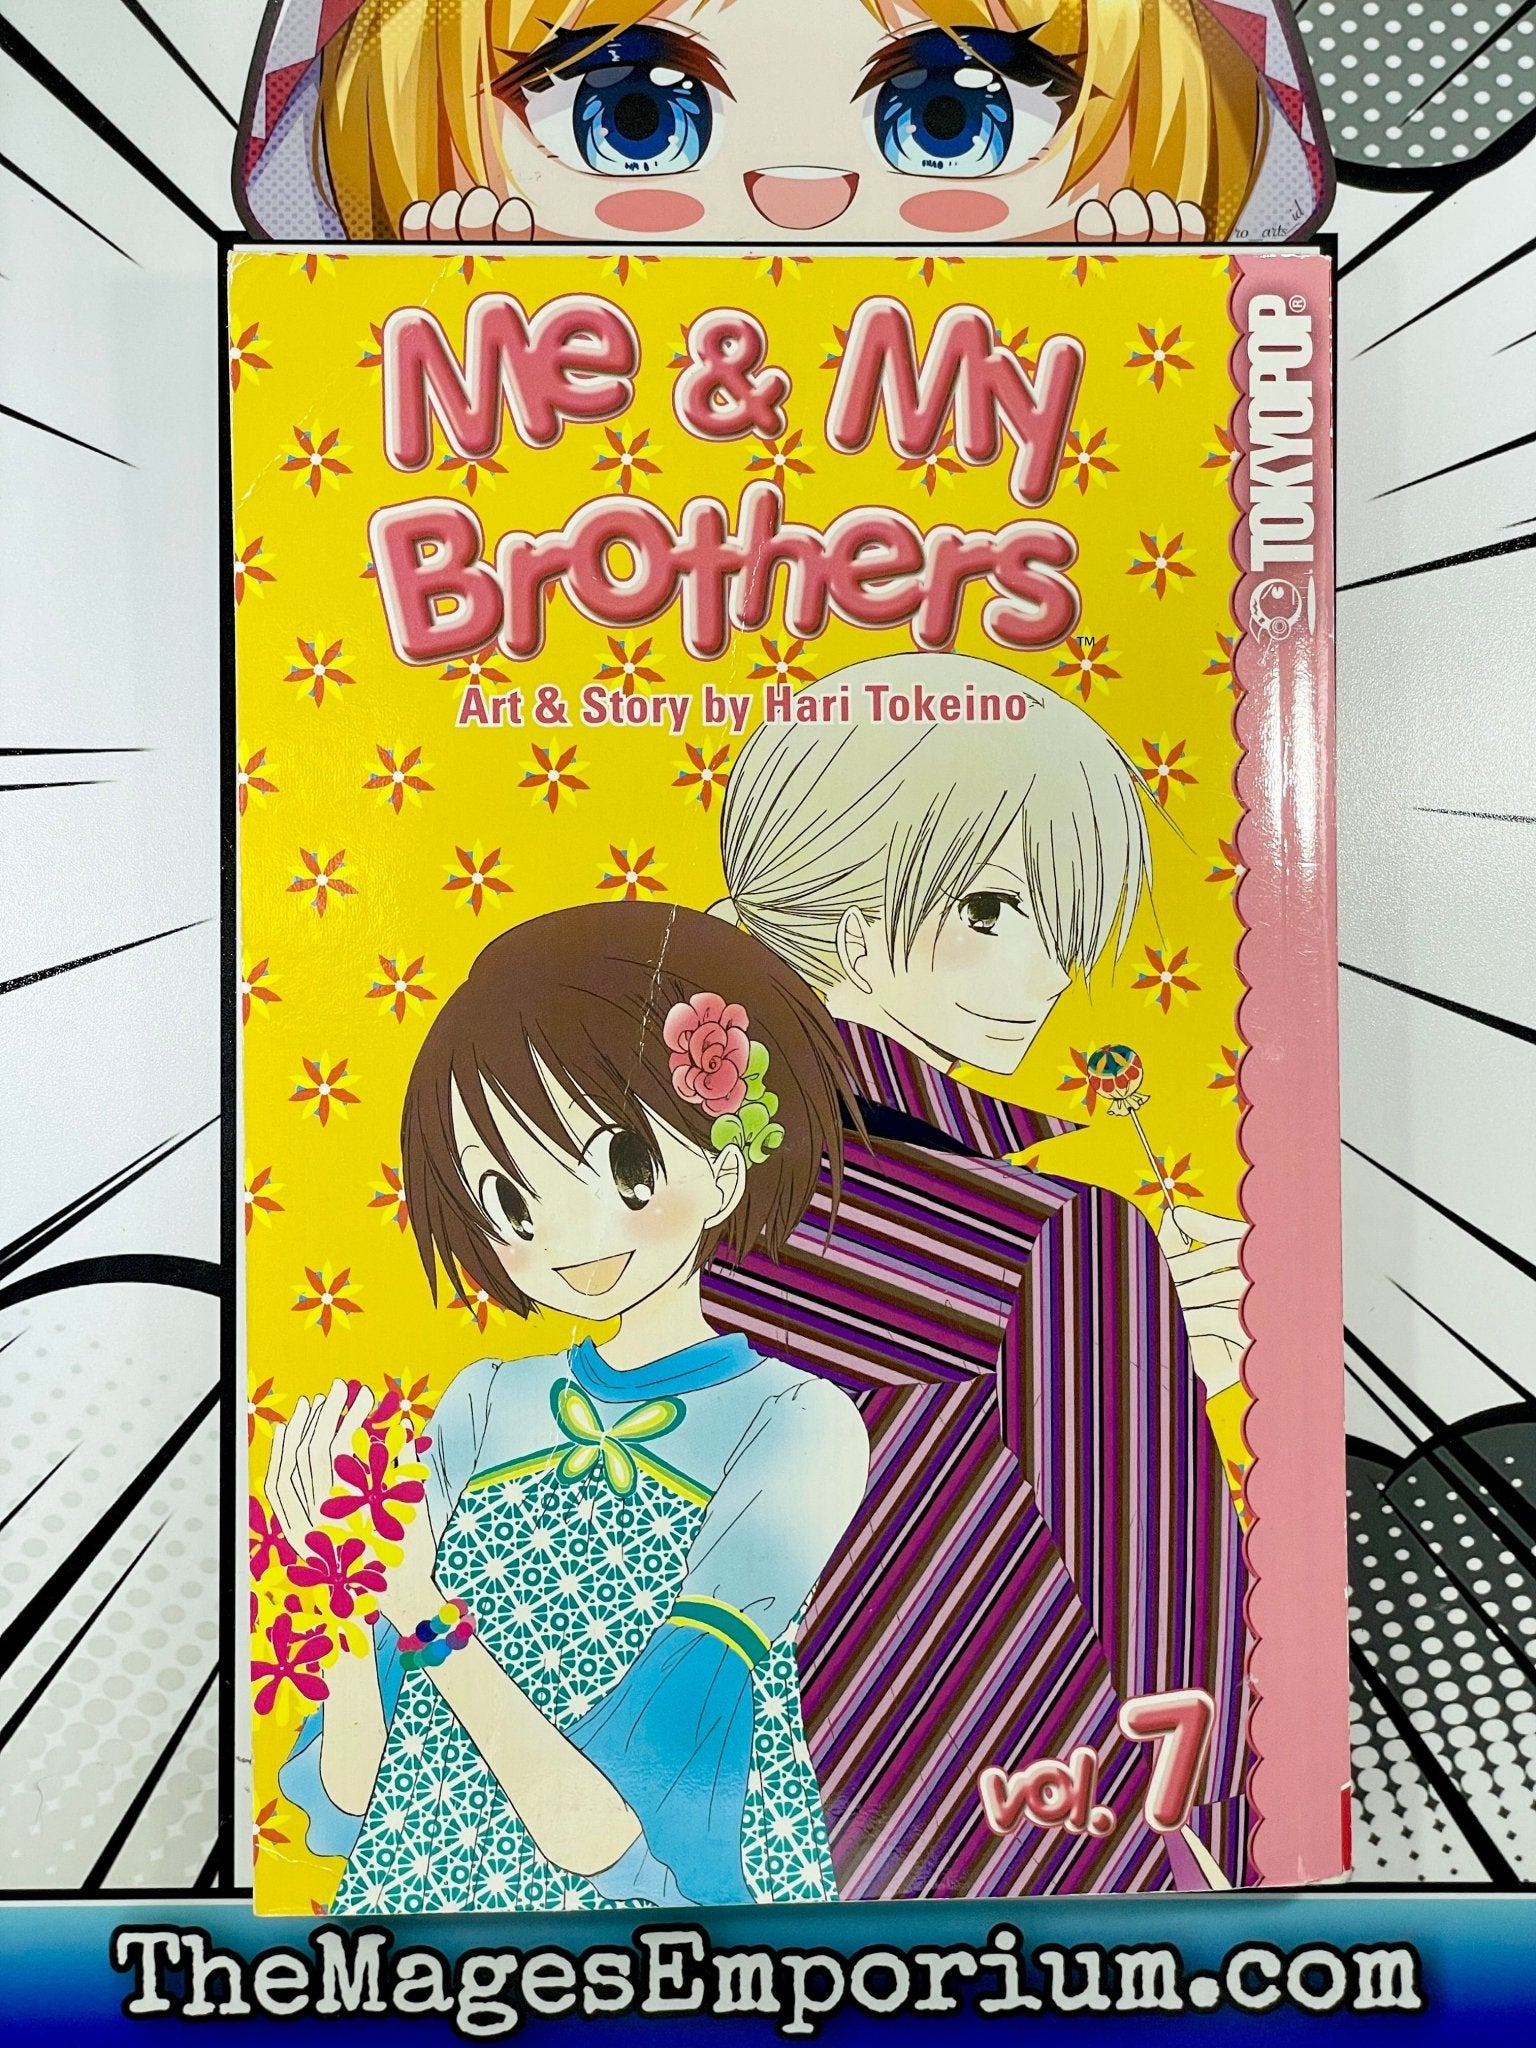 My Brothers And Me Manga Tokyopop's Me & My Brothers Vol 7 Manga for only 5.99 at Tokyopop!| The  Mage's Emporium